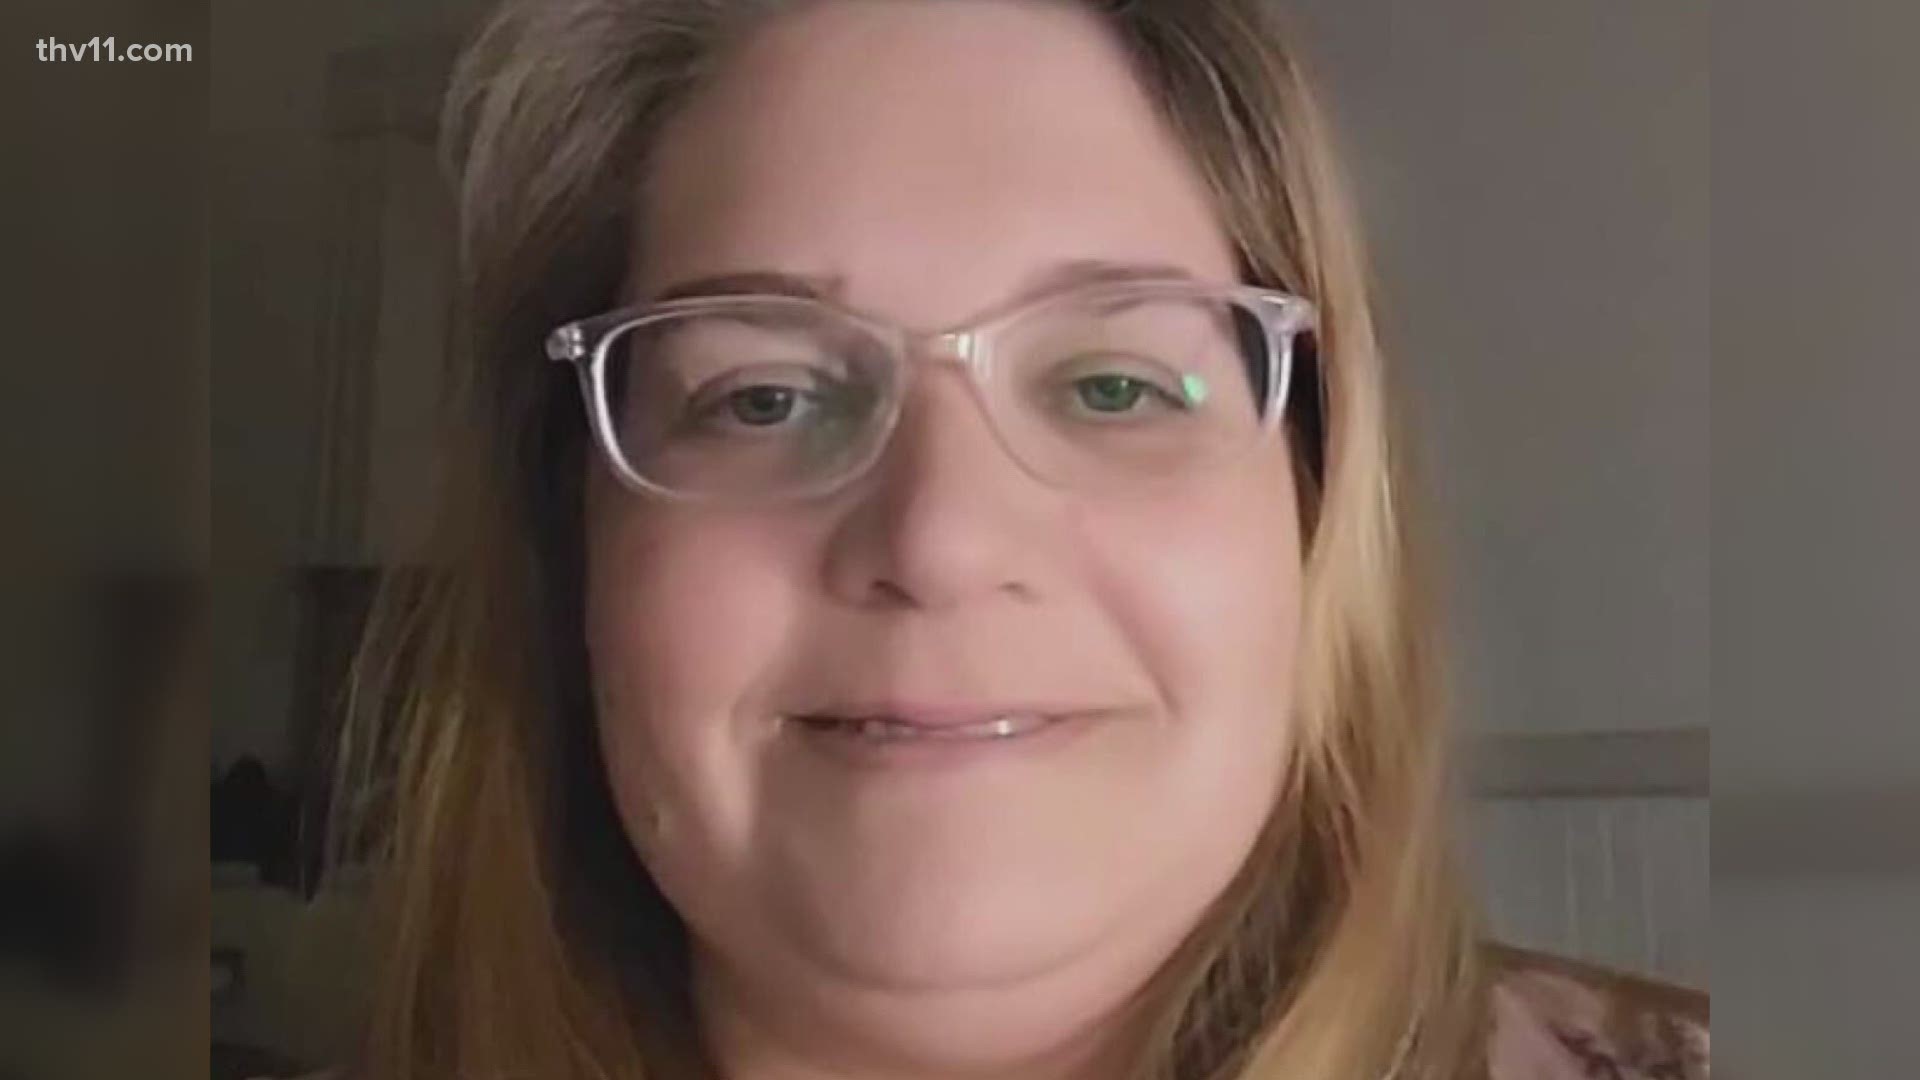 We sadly share a 46-year-old Arkansas mother's struggle with the virus, one she lost just a few weeks ago, has left her family grieving and shocked.